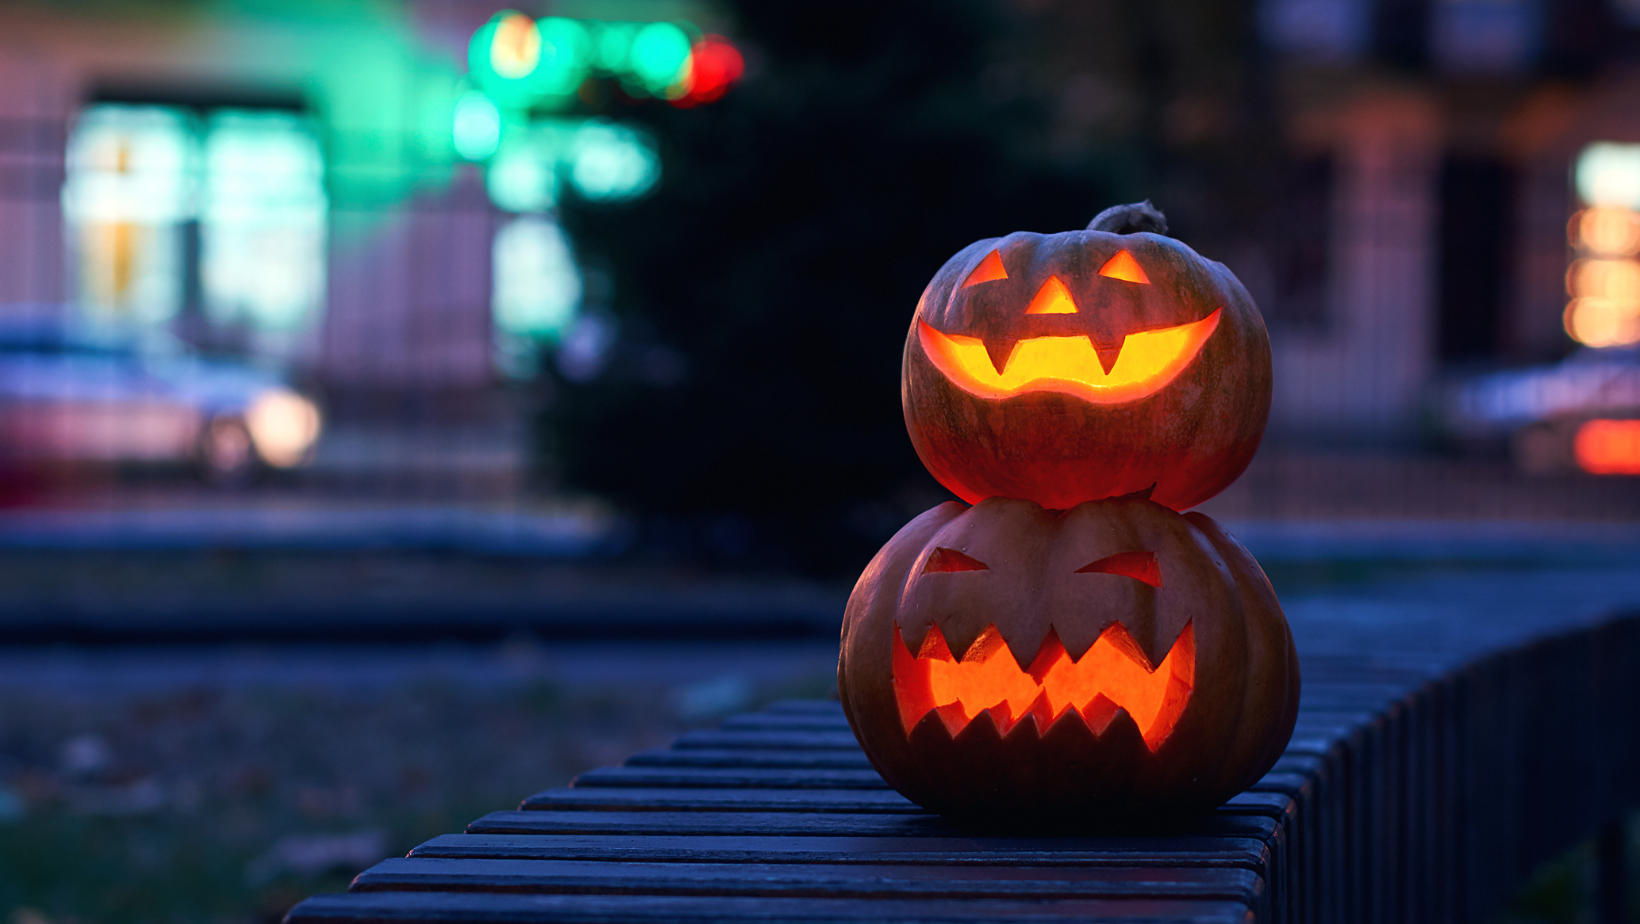 Be safe this Halloween, Raiders. Check out some tips from our staff to make your Halloween both safe and fun. 